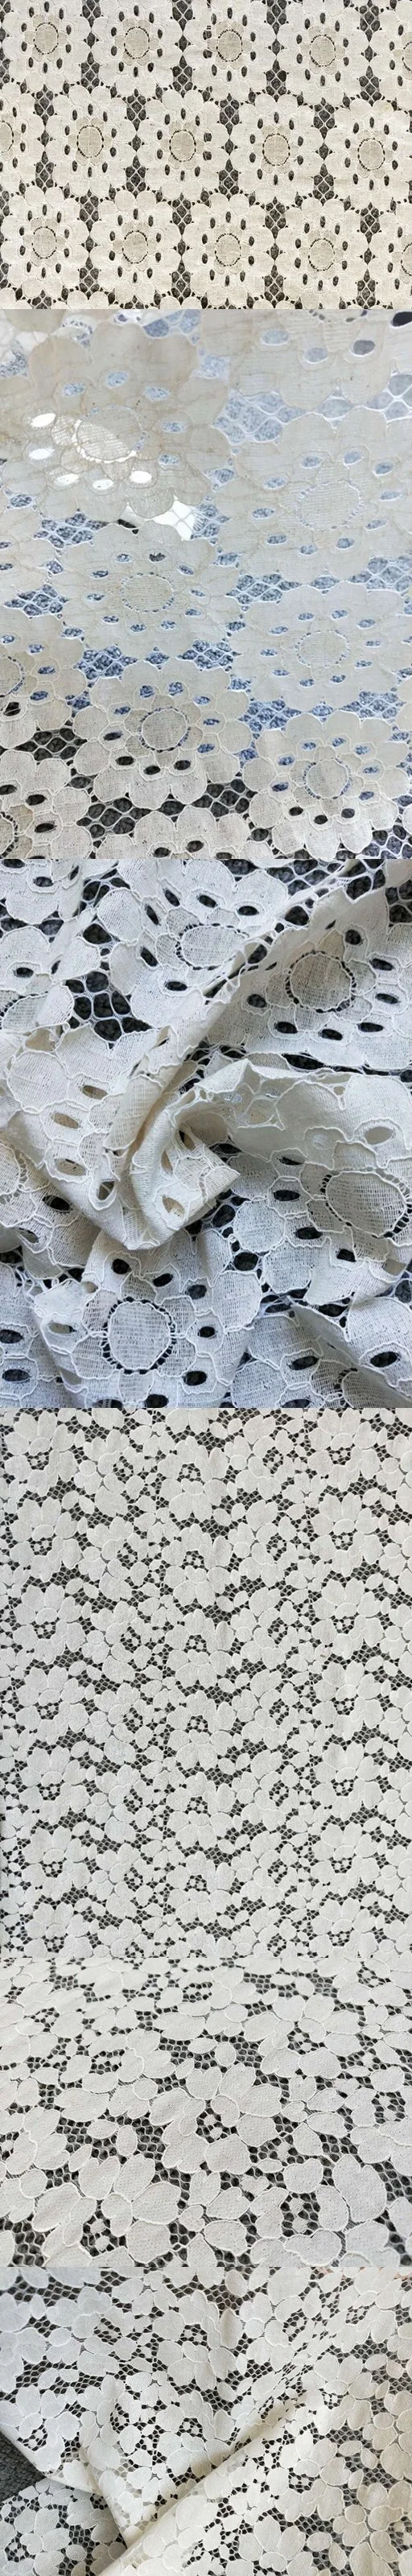 Hot Sale off-White Chemical Embroidery Lace Fabric for Party Dress